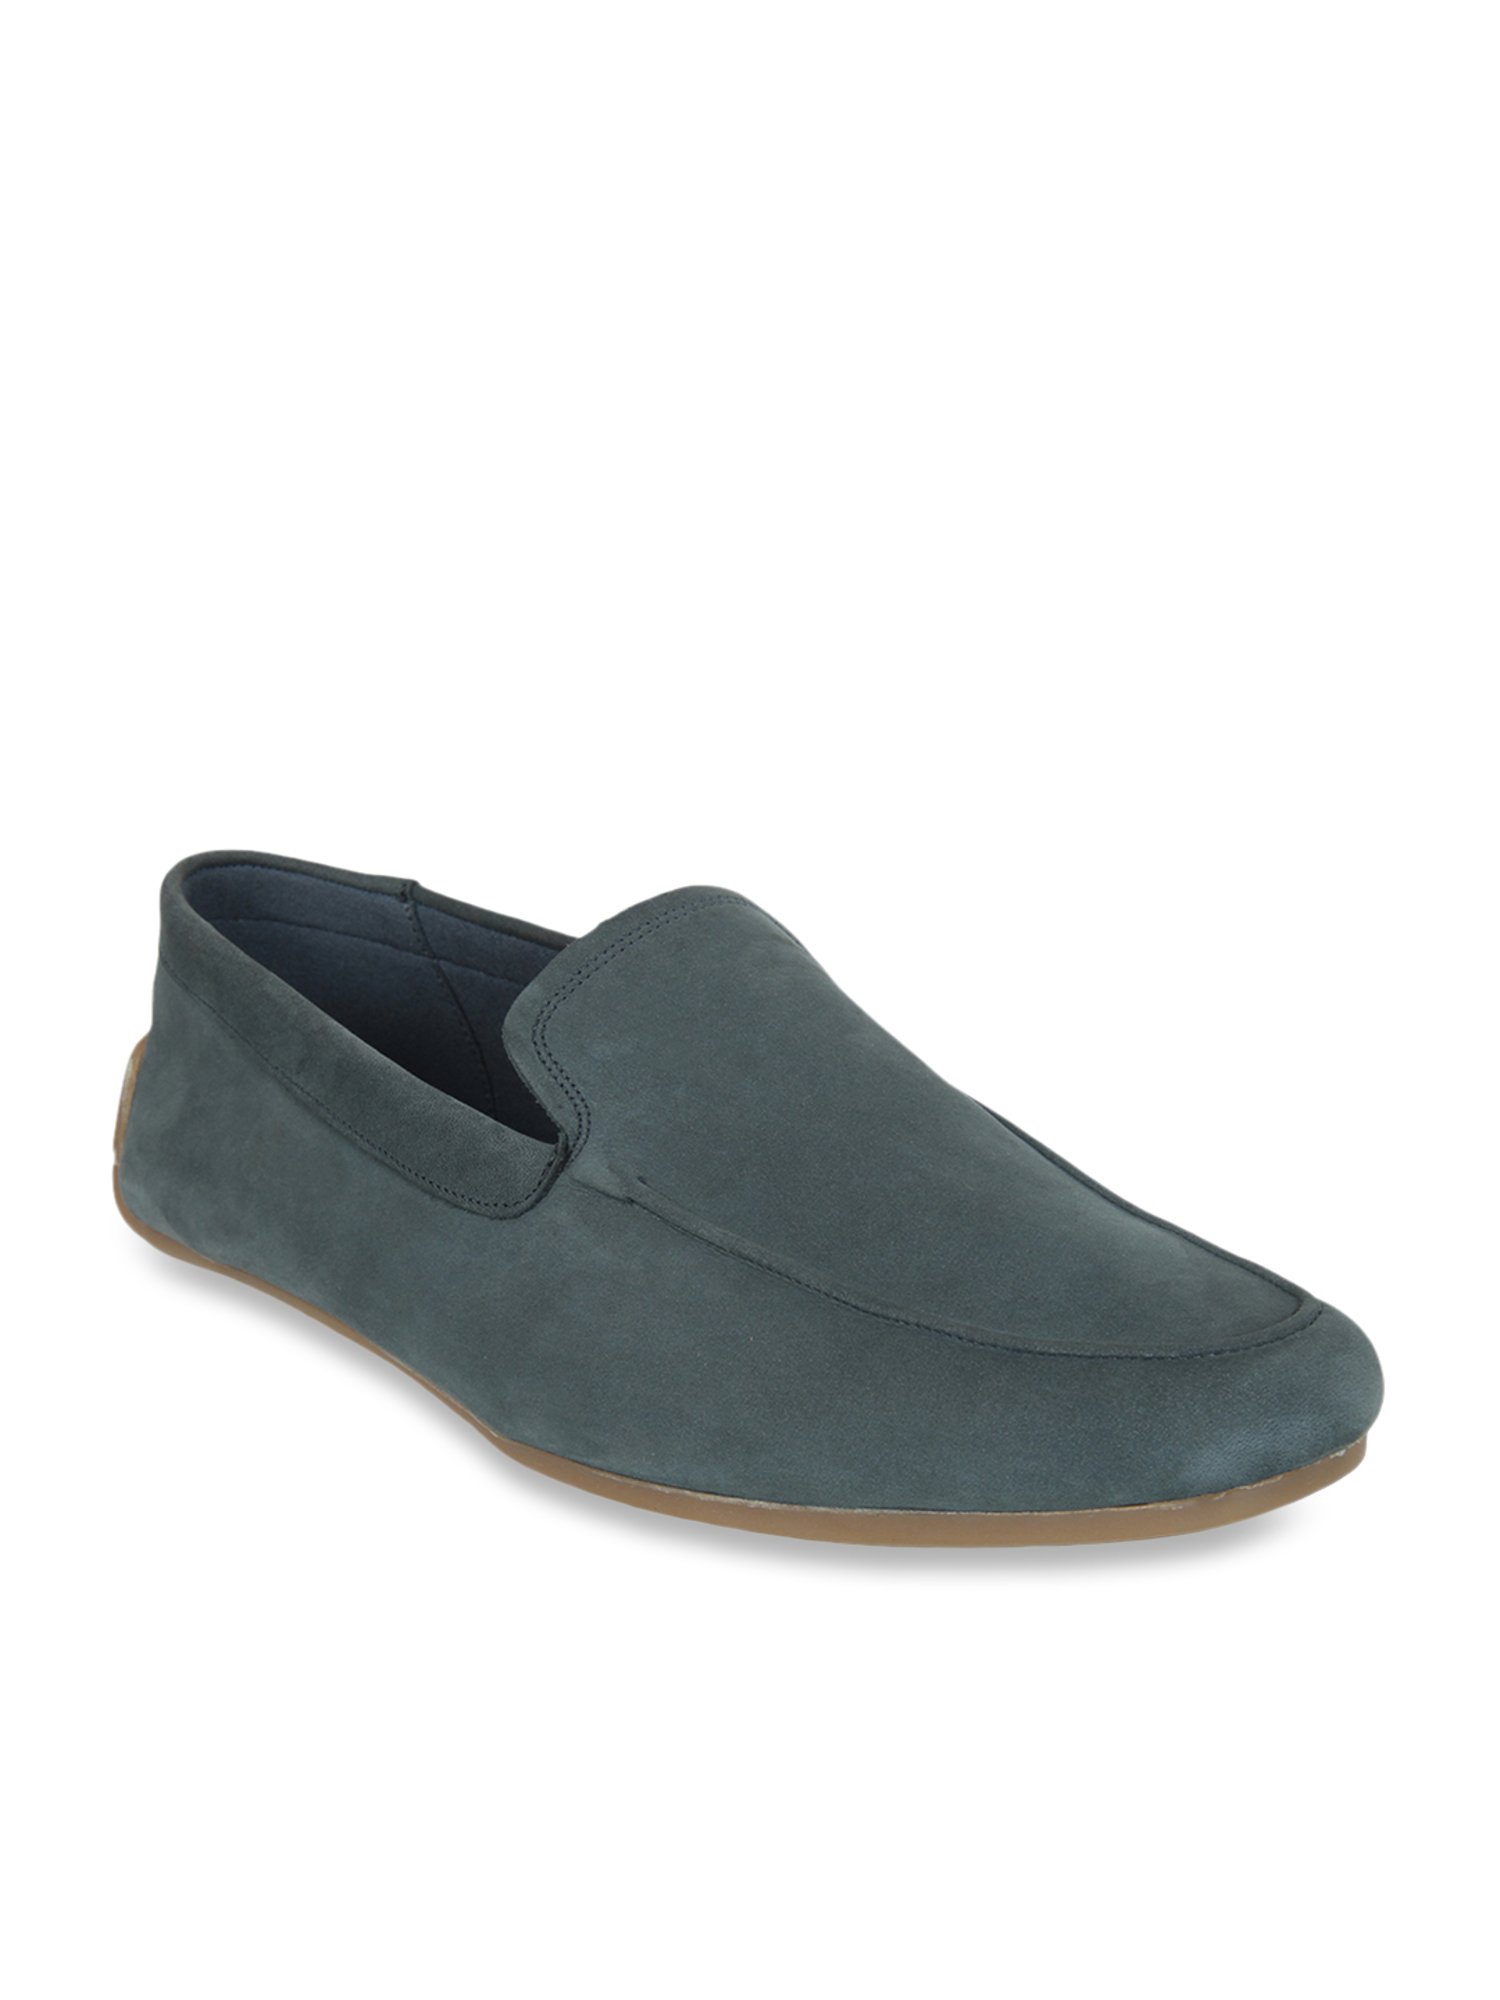 teal blue loafers